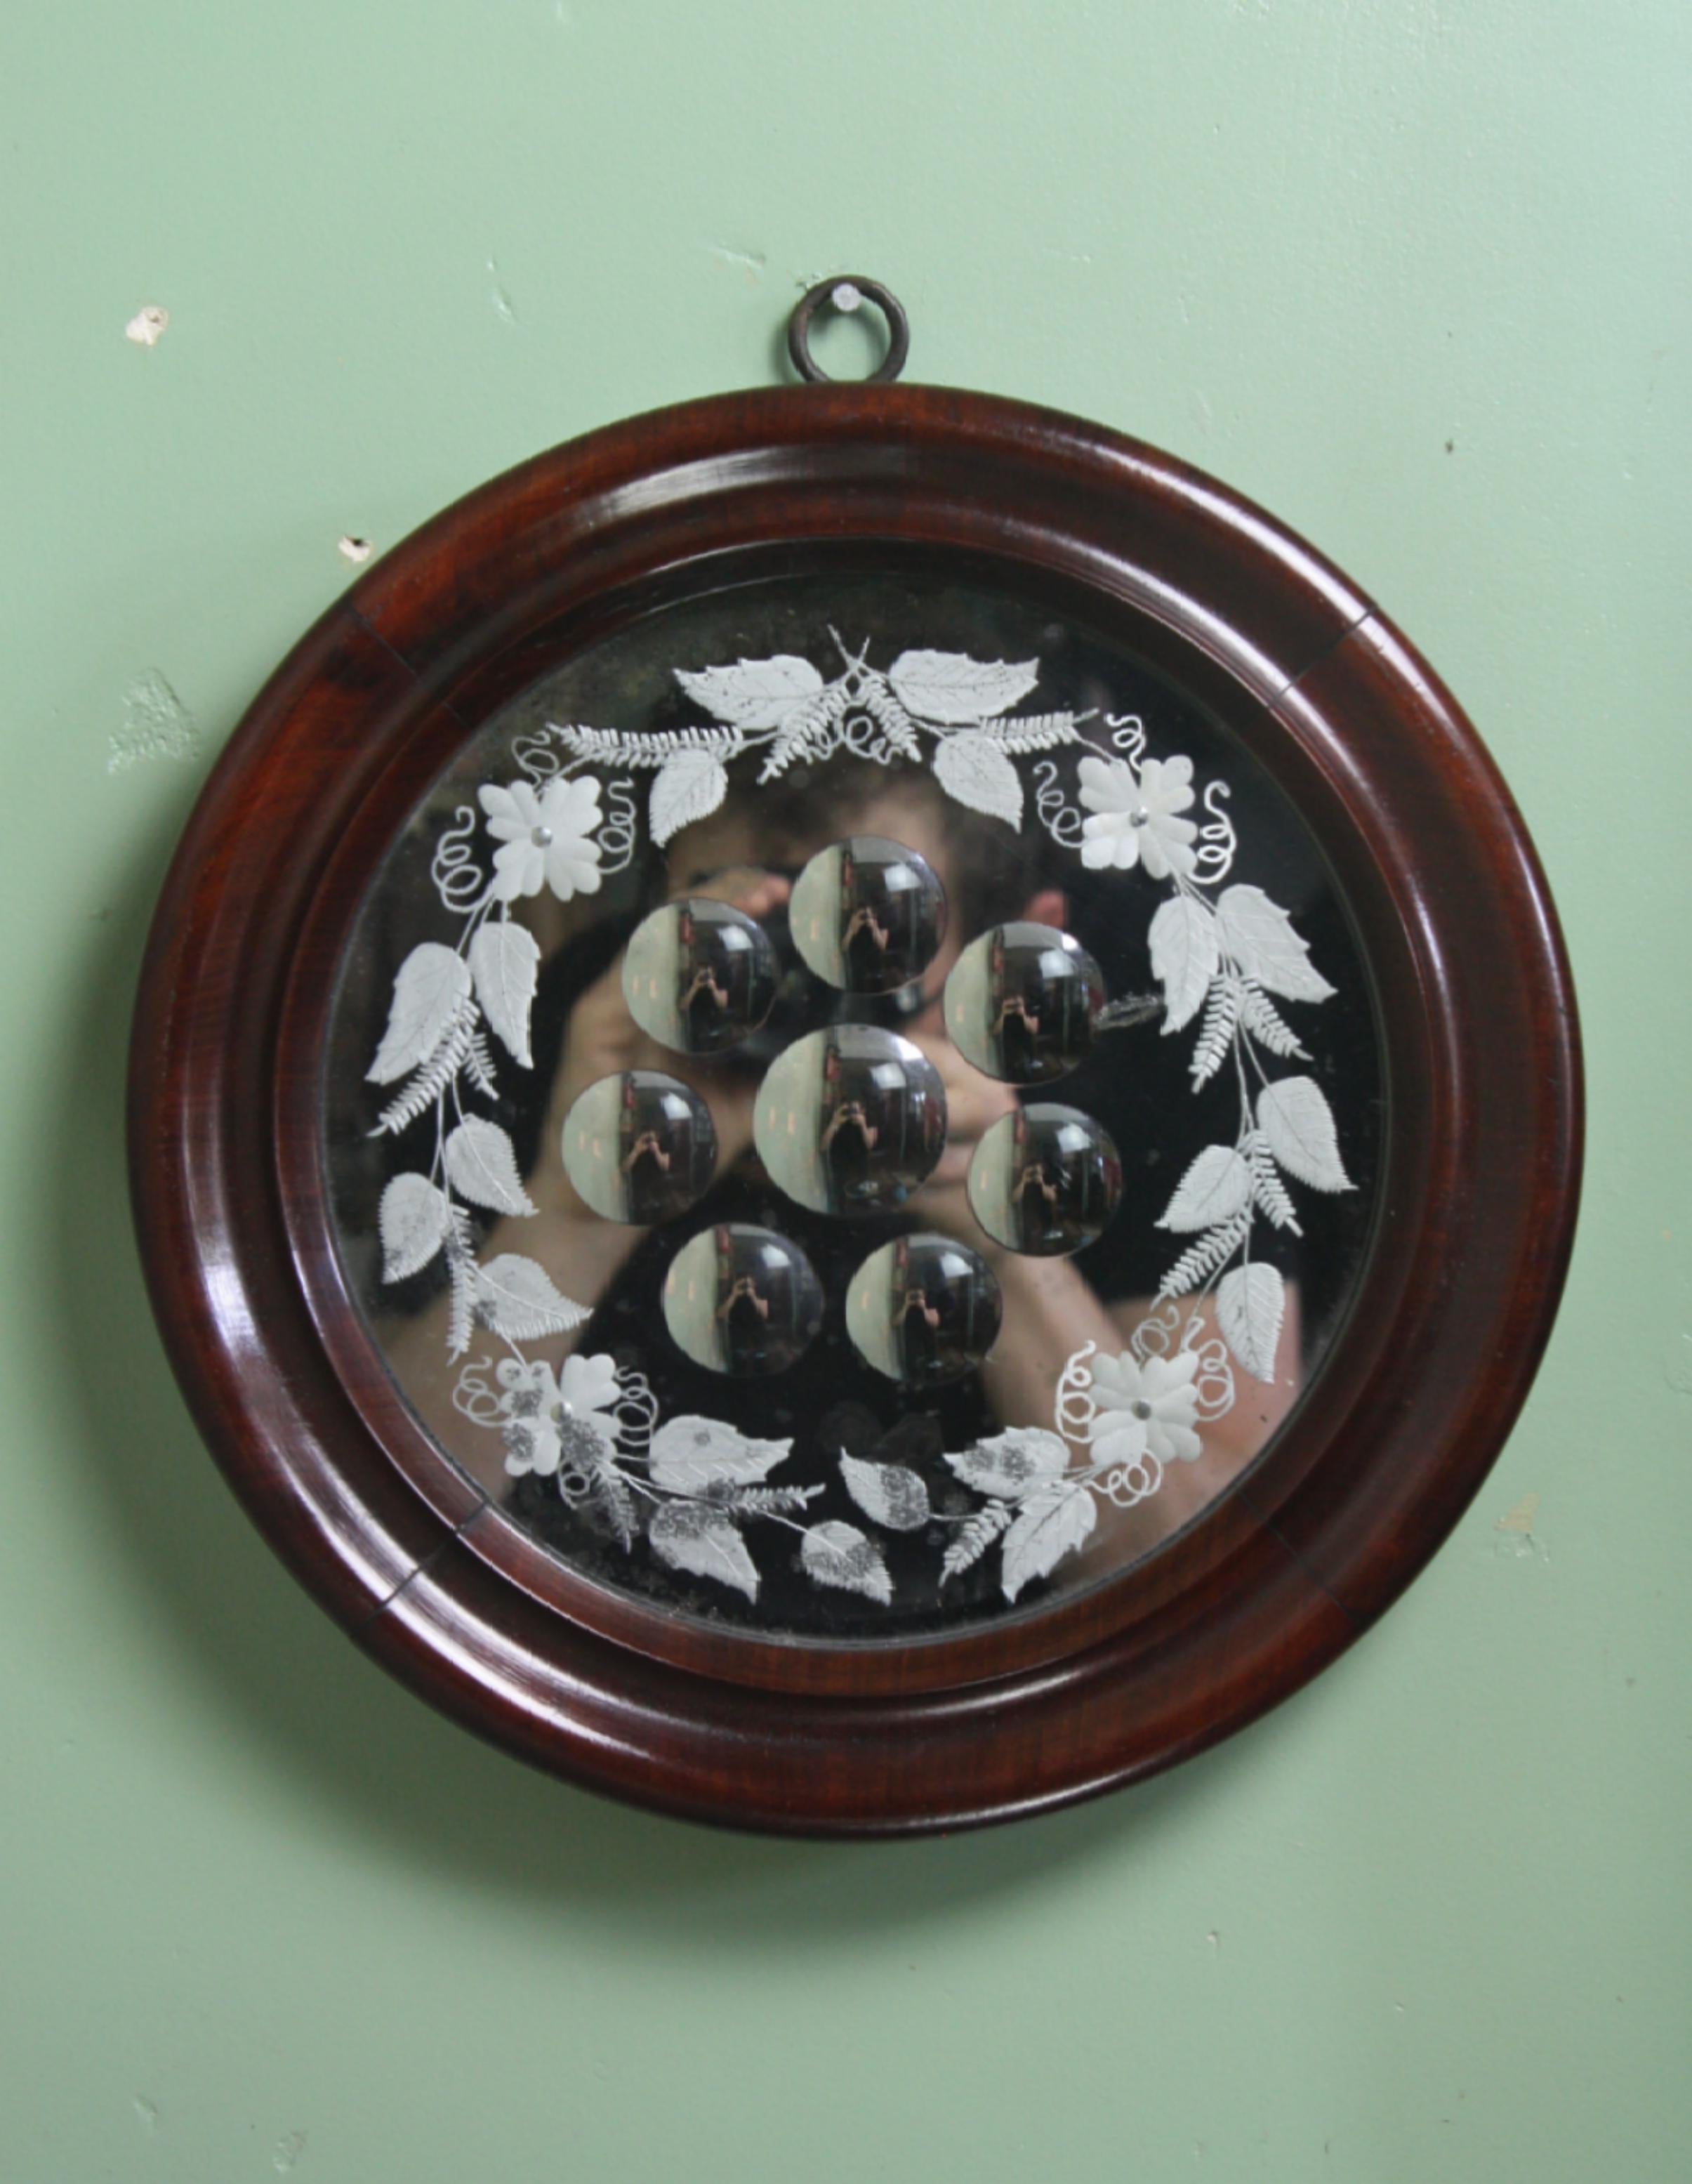 A decorative and large sorcerers mirror, with eight reverse ground optics with an acid etched floral border. The mirror plate has age related oxidizing and pitting, the frame is rosewood as is of a lovely color

In all round excellent condition